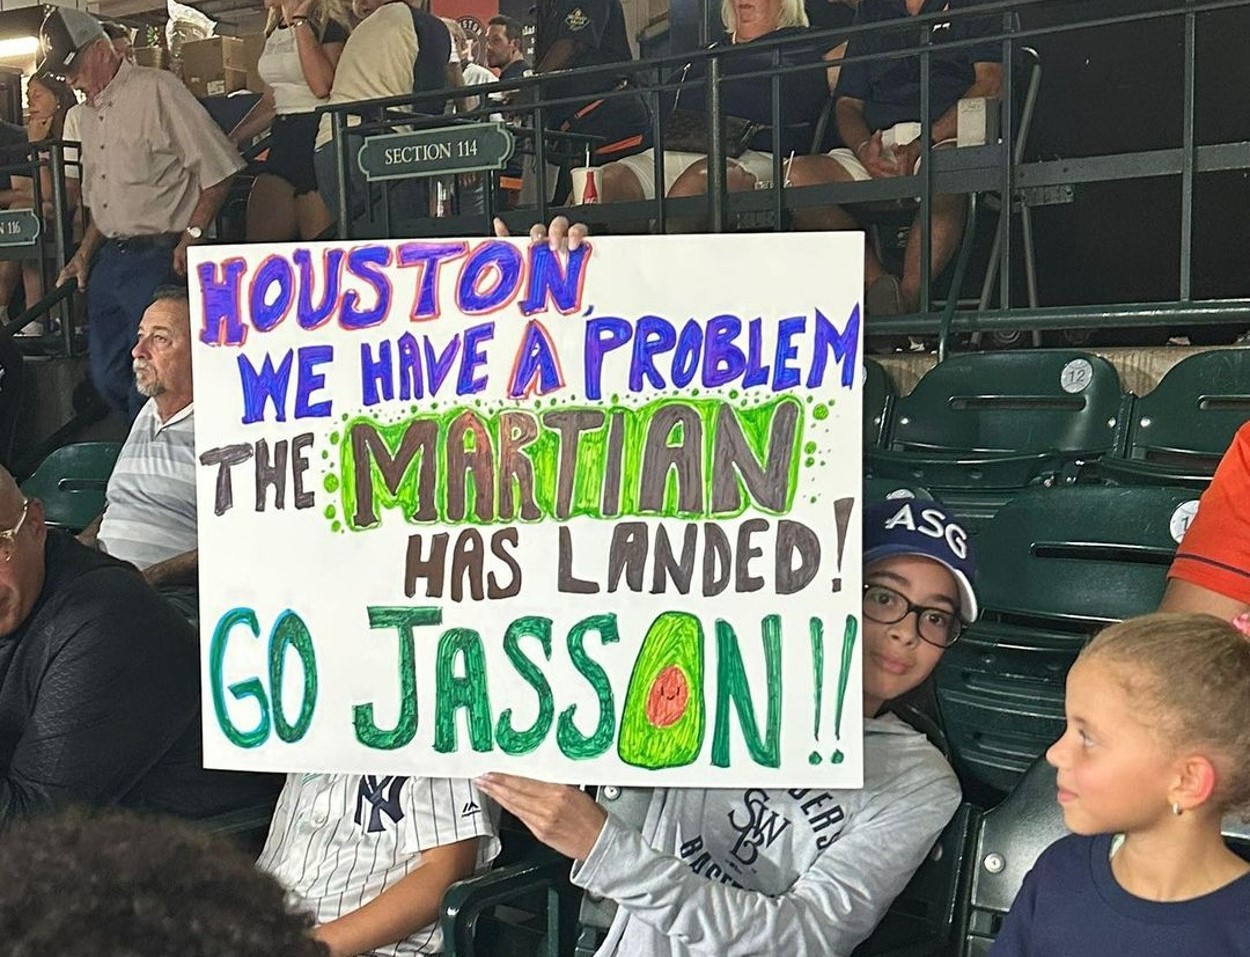 A fan holding a placard for Jasson Dominguez during his debut for the Yankees vs. the Astros in Houston on September 1, 2023.